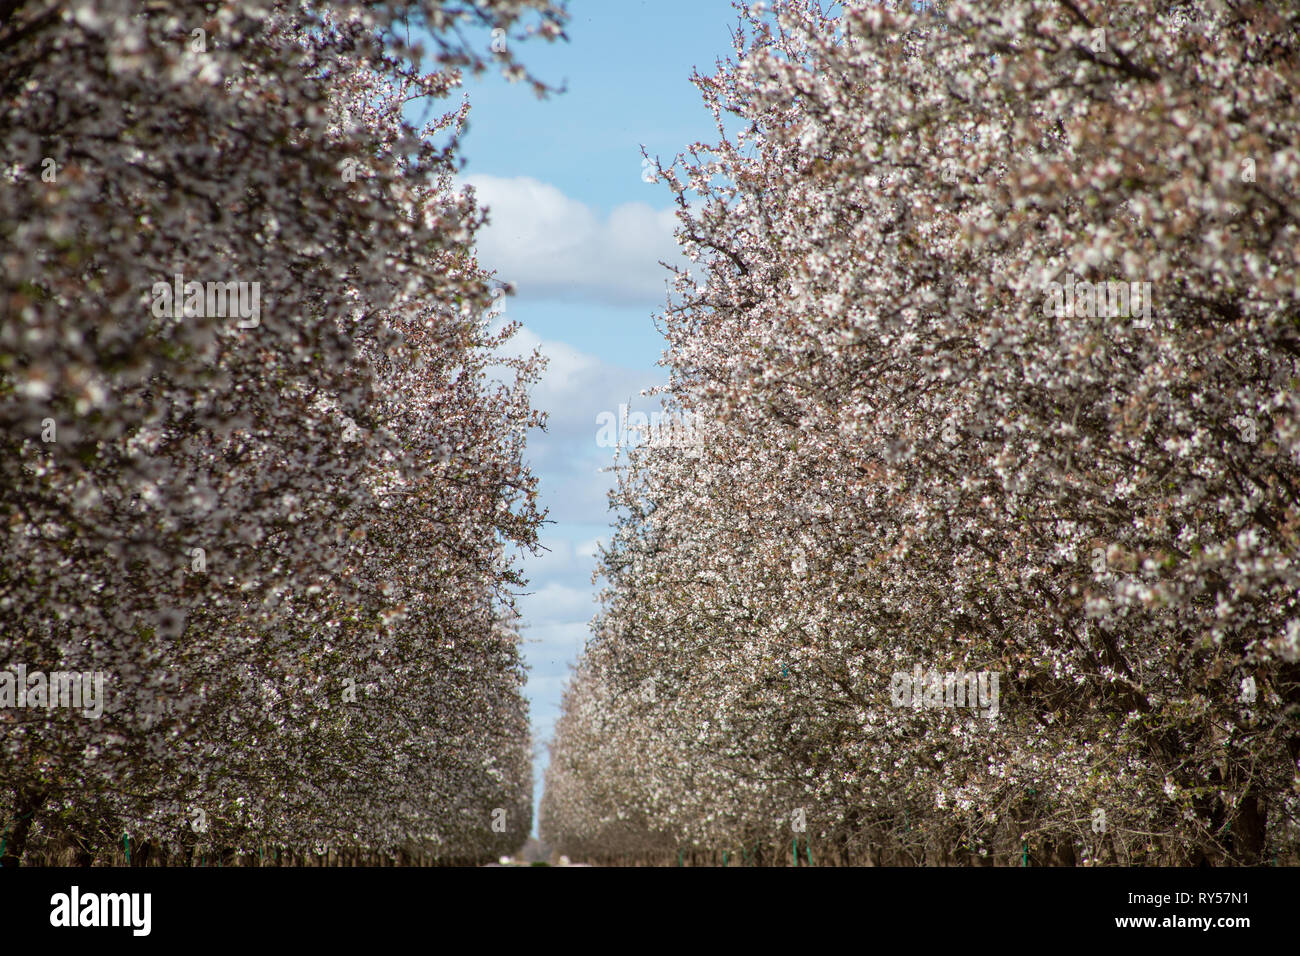 Almond Grove in California with blue sky Stock Photo